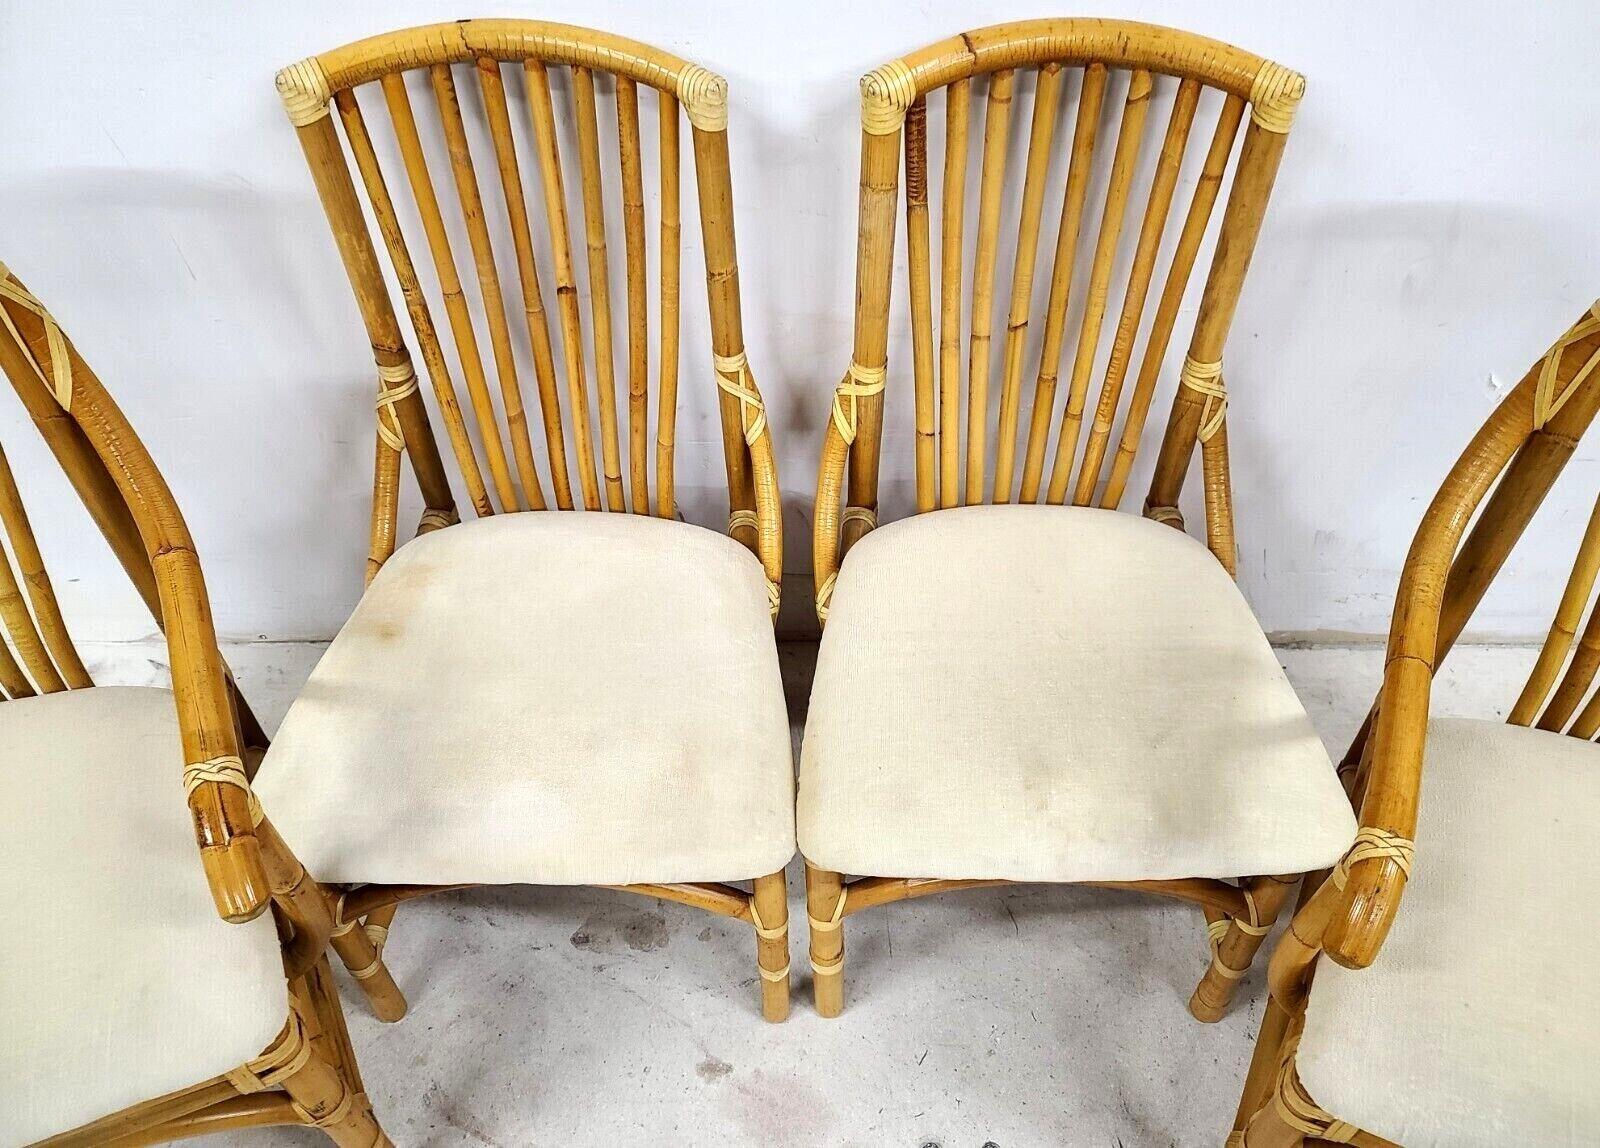 Vintage 1970s Bamboo Rattan Chairs, Set of 4 In Good Condition For Sale In Lake Worth, FL